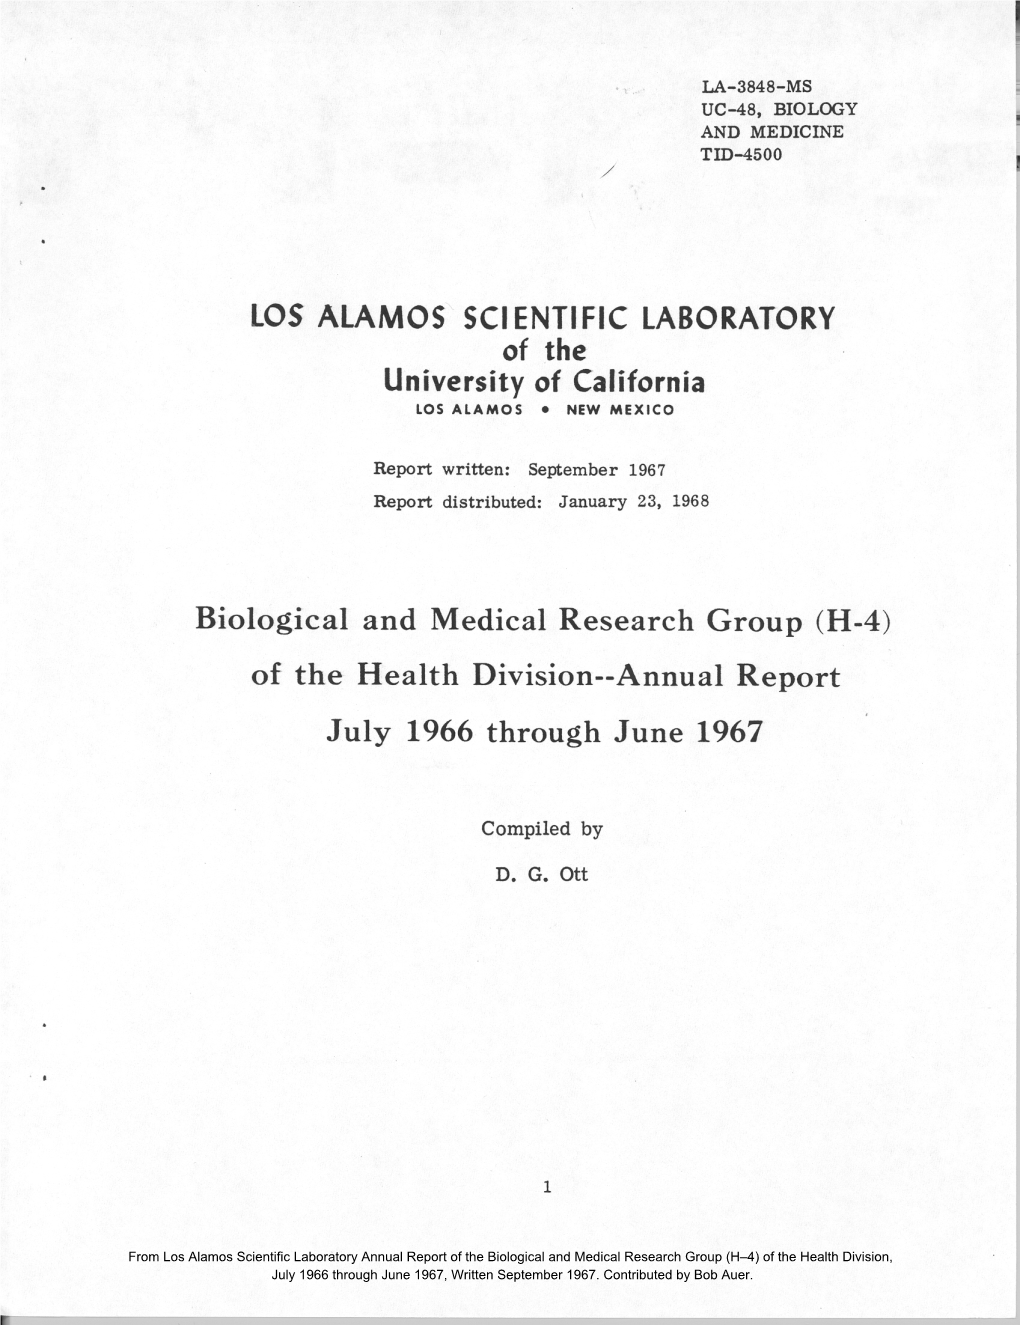 From Los Alamos Scientific Laboratory Annual Report of The